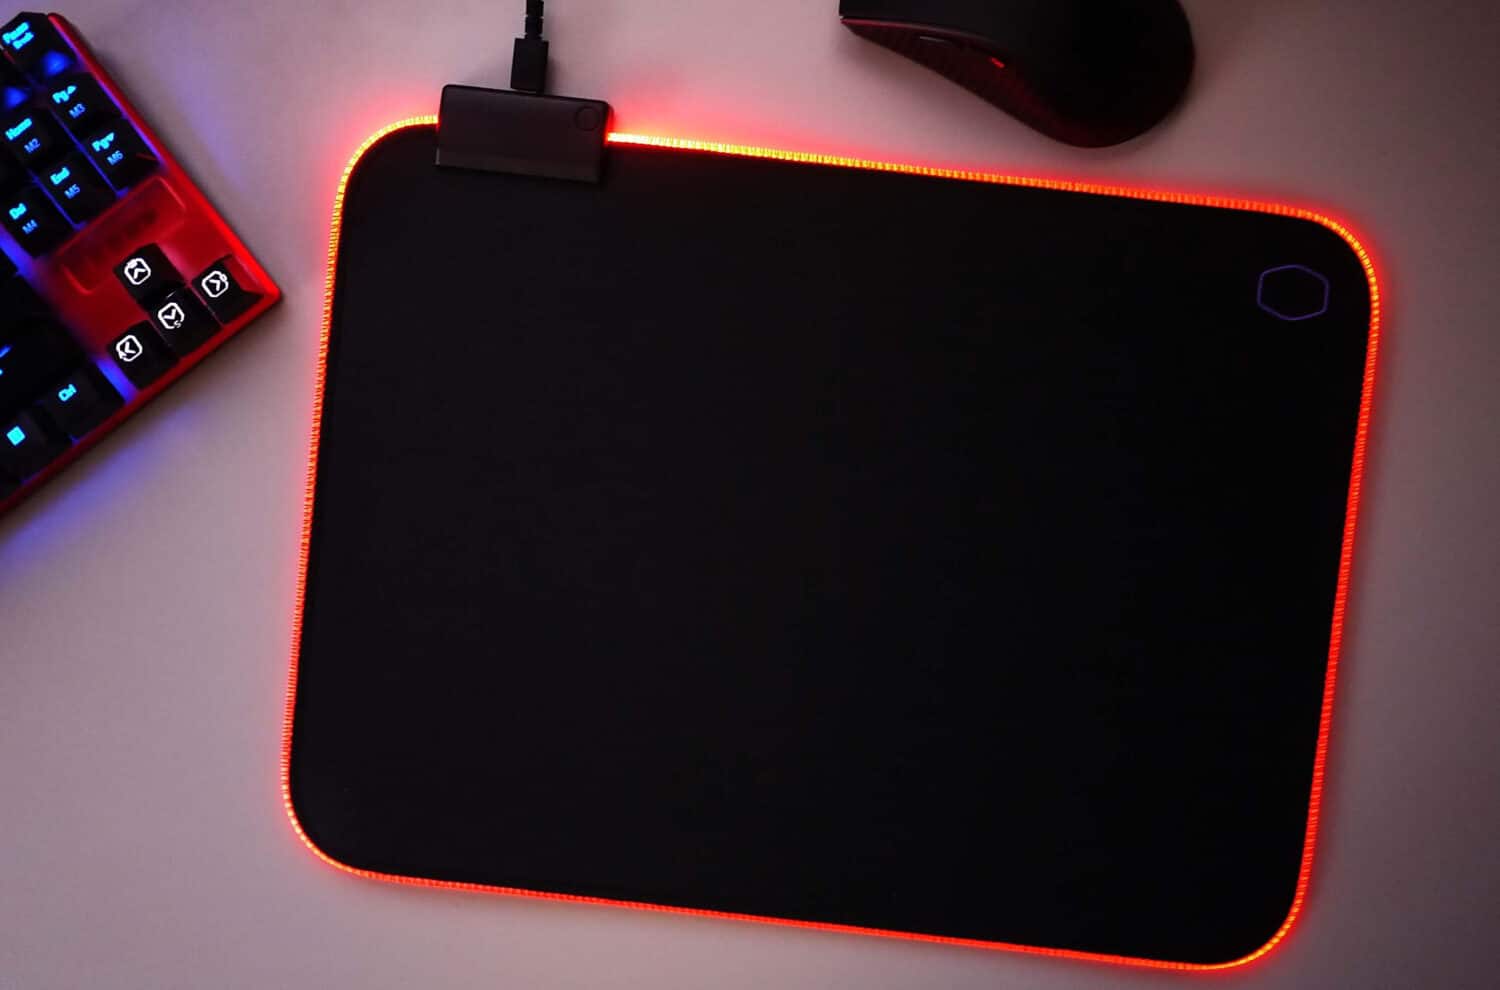 Why Use A Mouse Pad